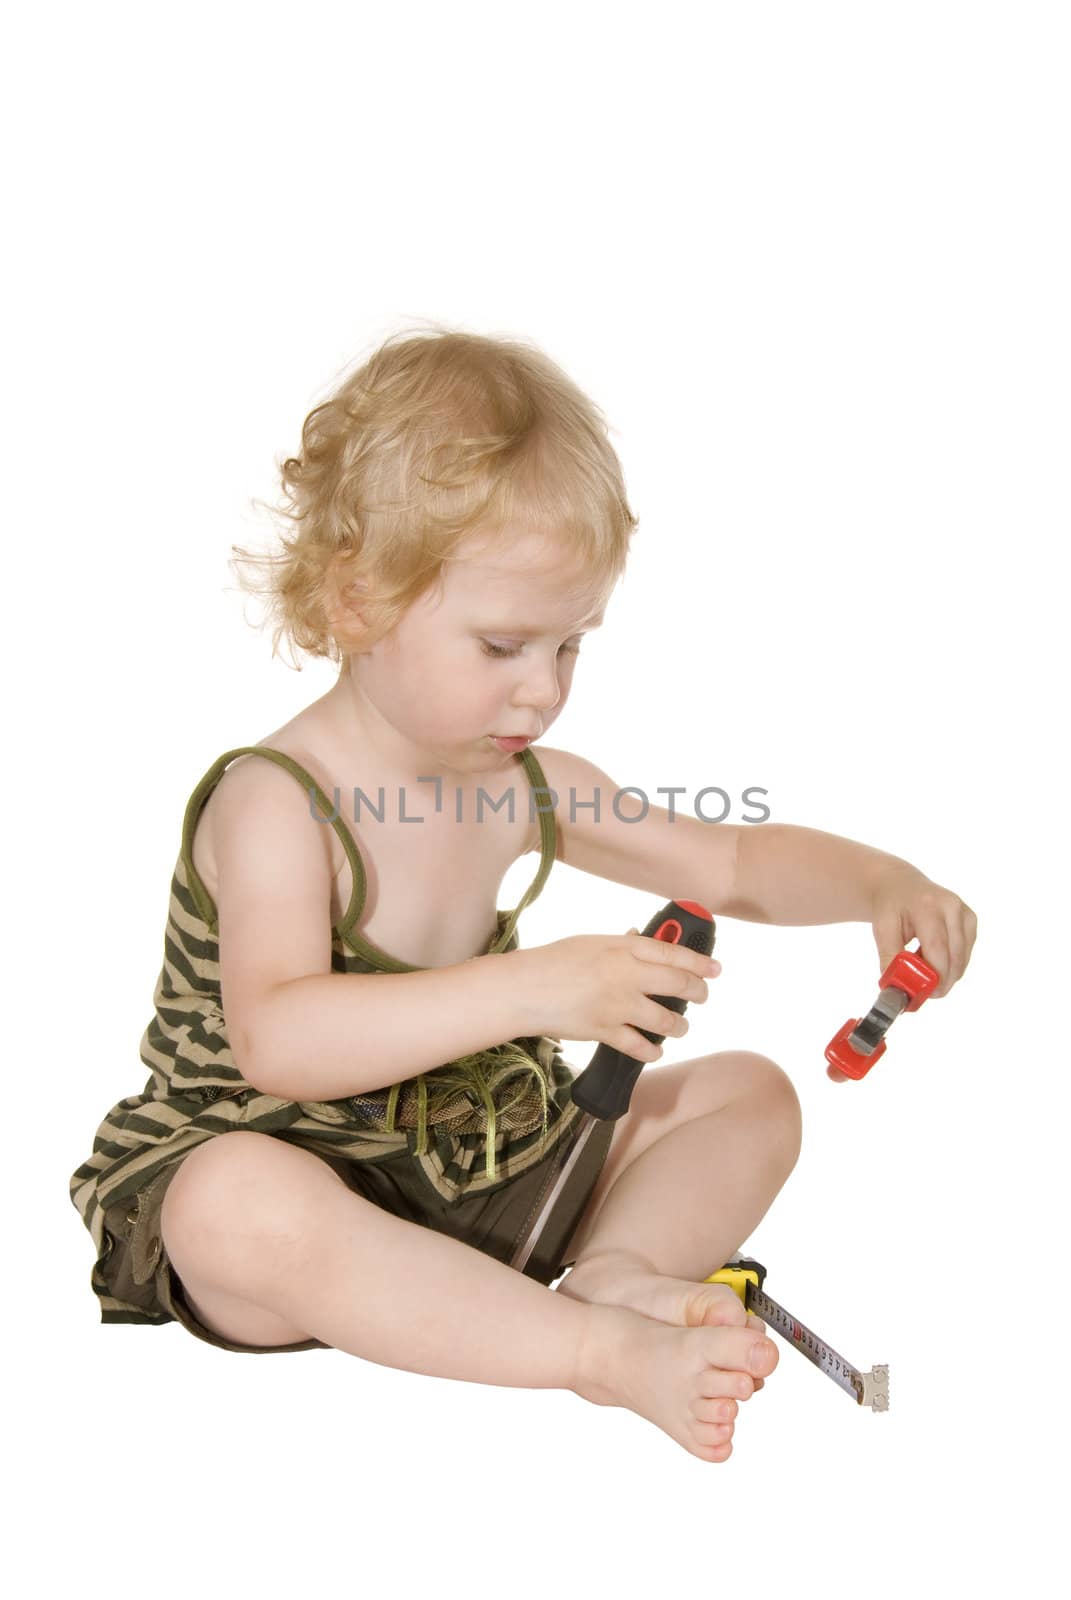 girl with a screwdriver pliers and a tape measure on a white background